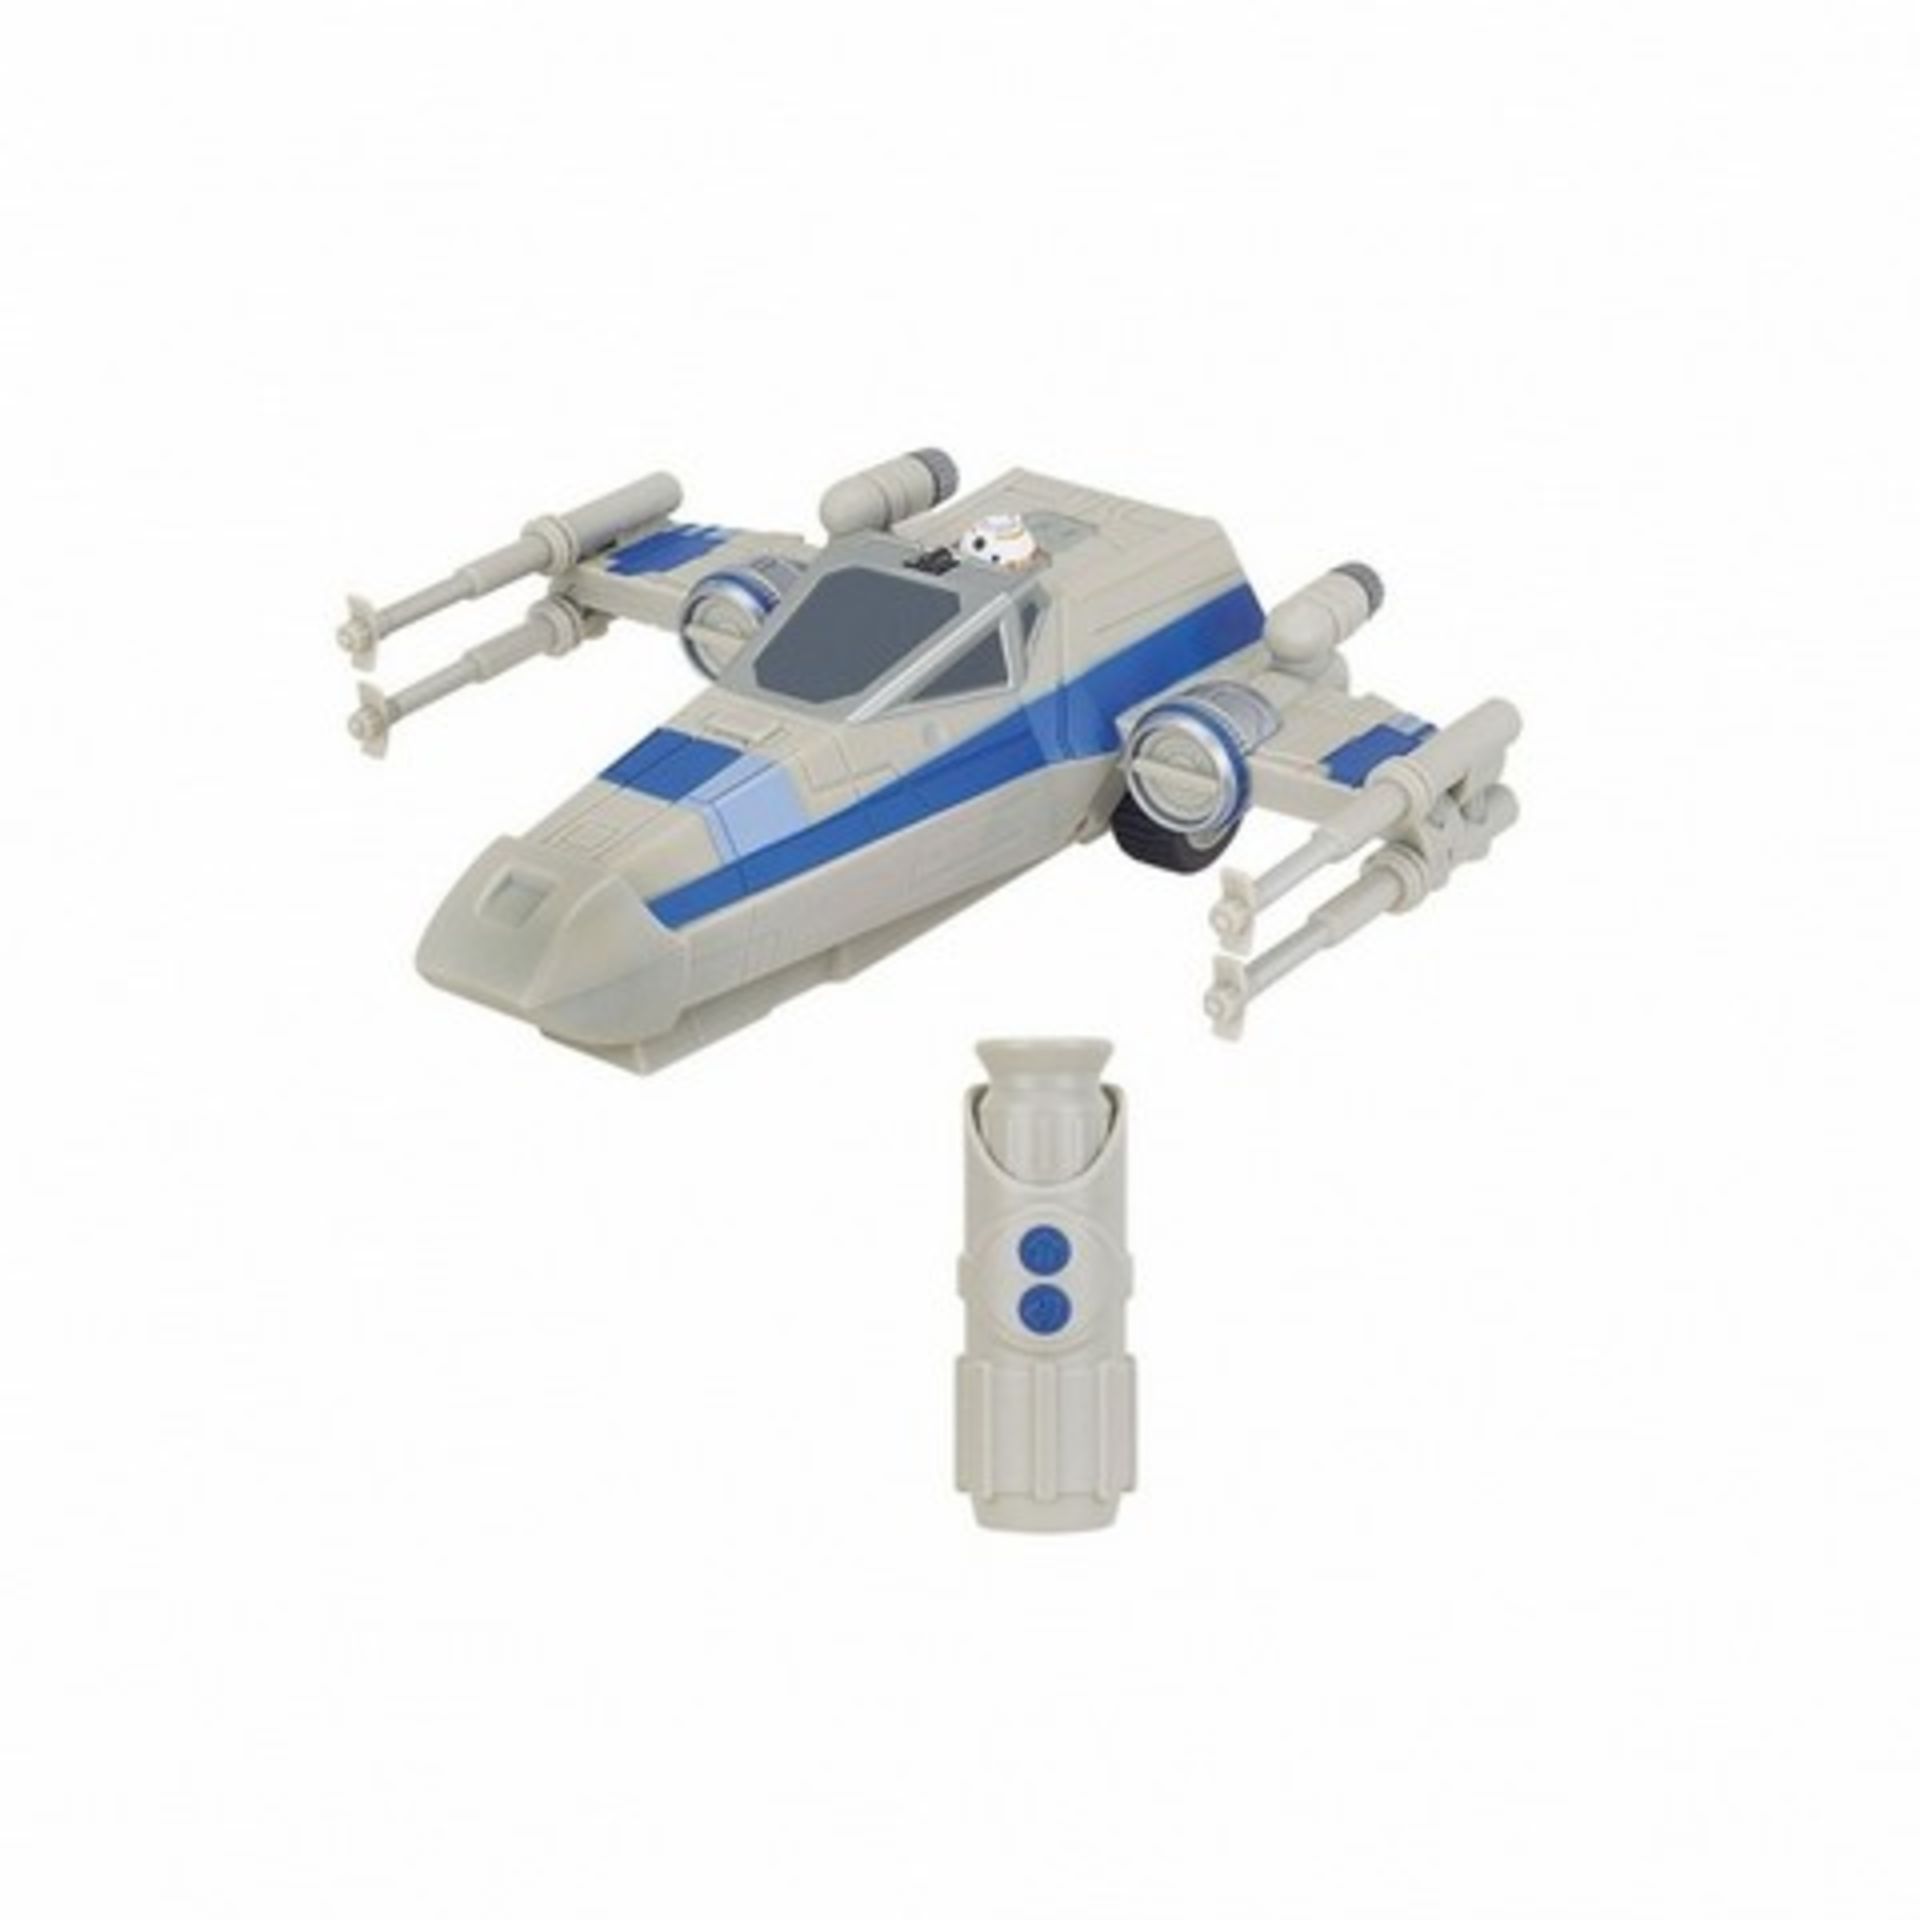 V Brand New Star Wars Resistance X-Wing Fighter Vehicle With Remote Control ISP £27.99 (